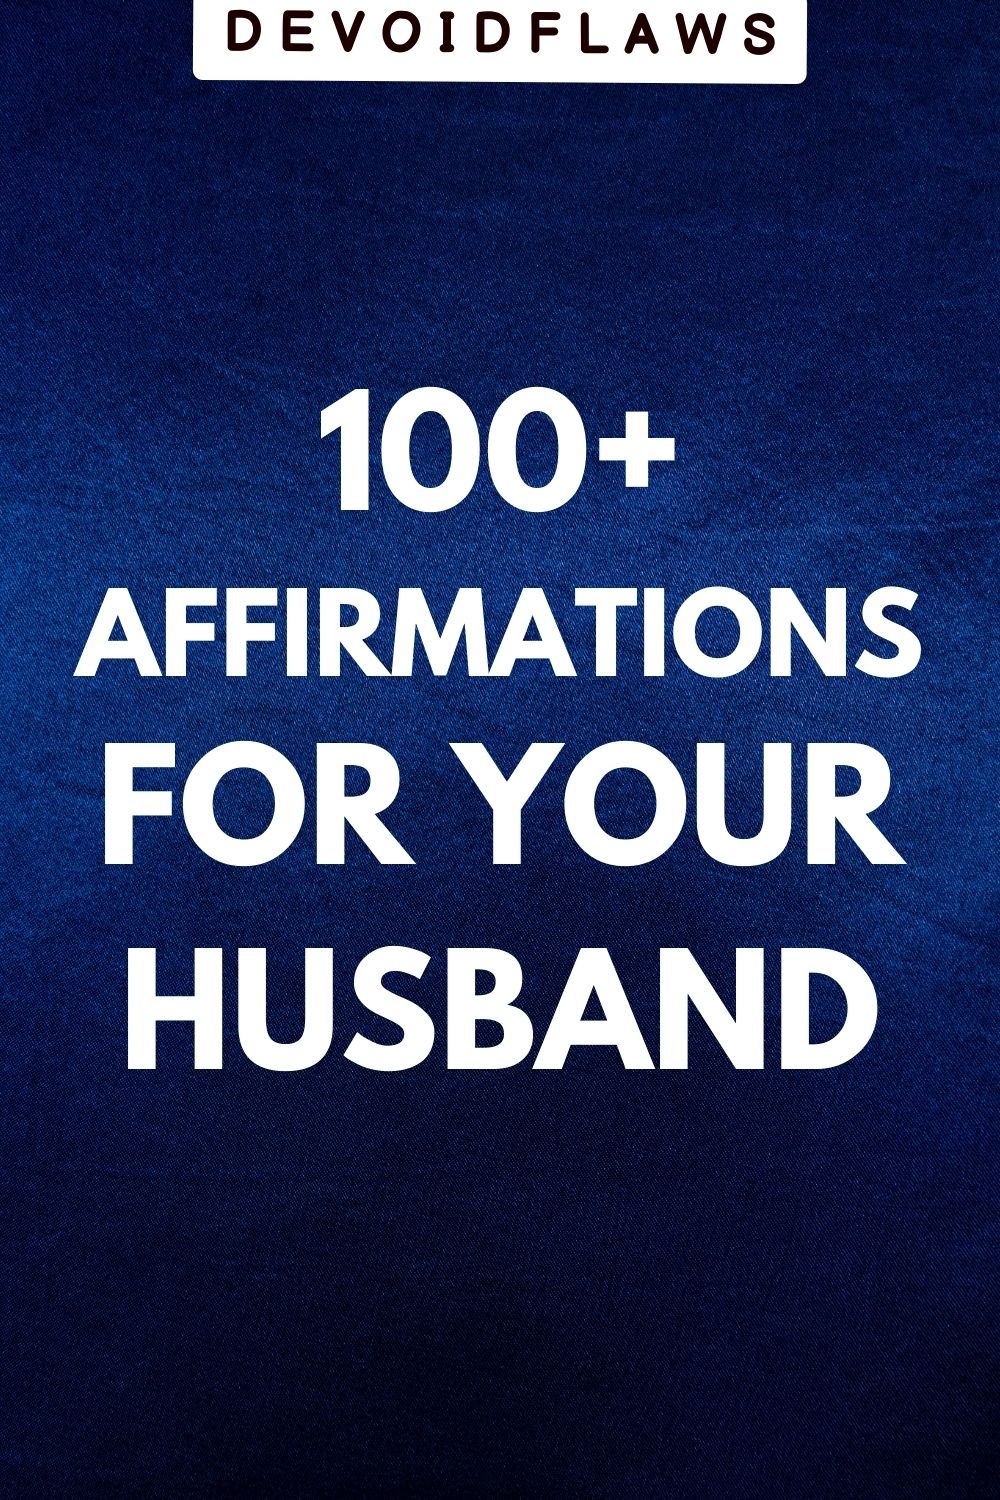 120 Affirmations for Your Husband